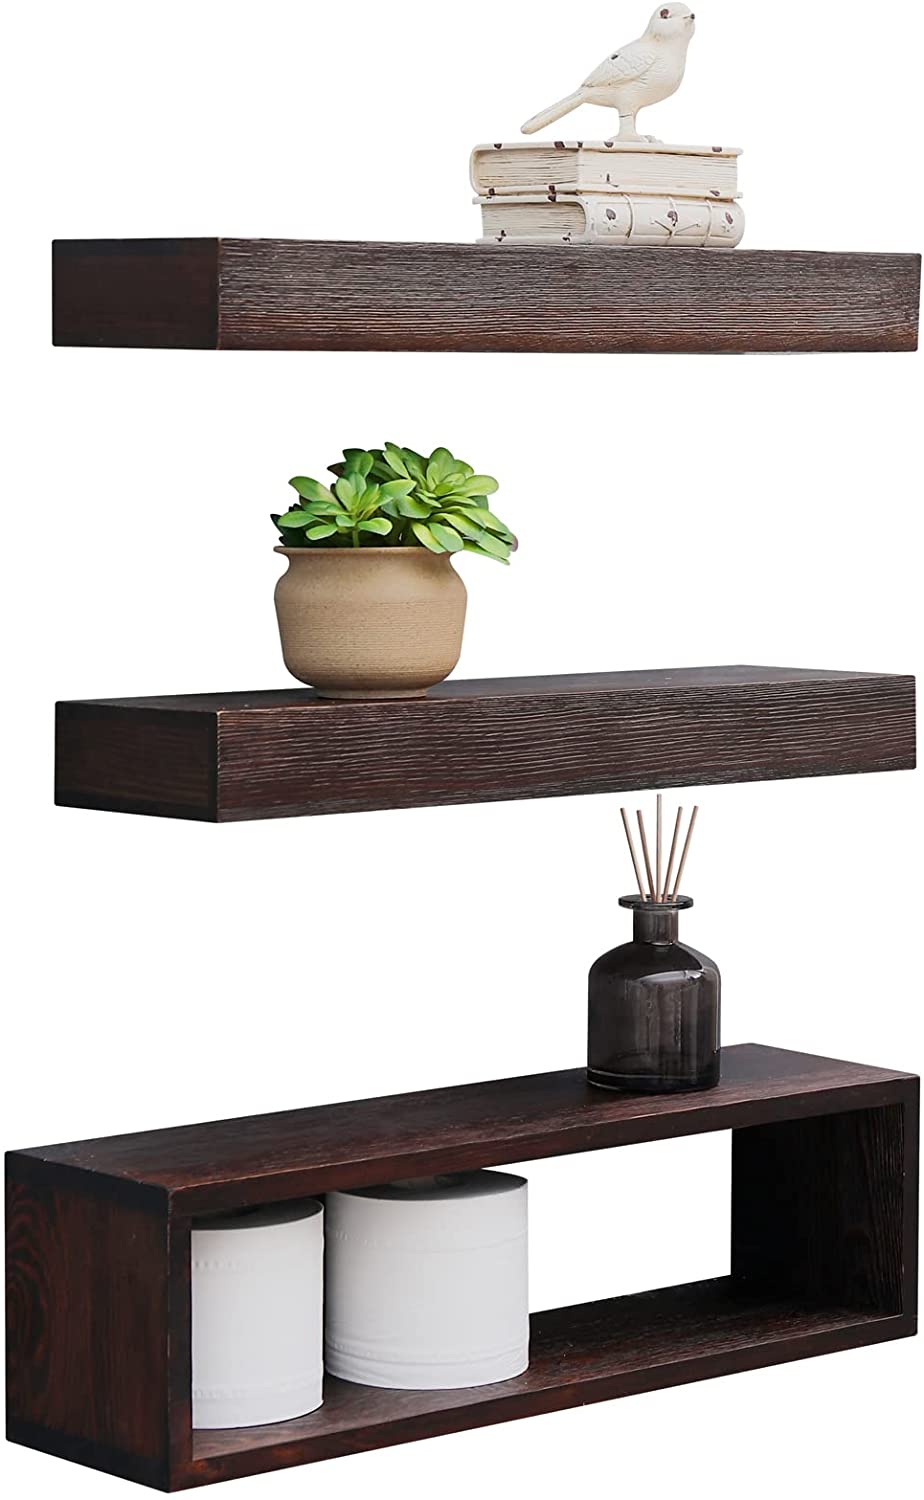 15.7 in. W x 5.9 in. D Tier Wall Mounted Floating Shelves, Rustic